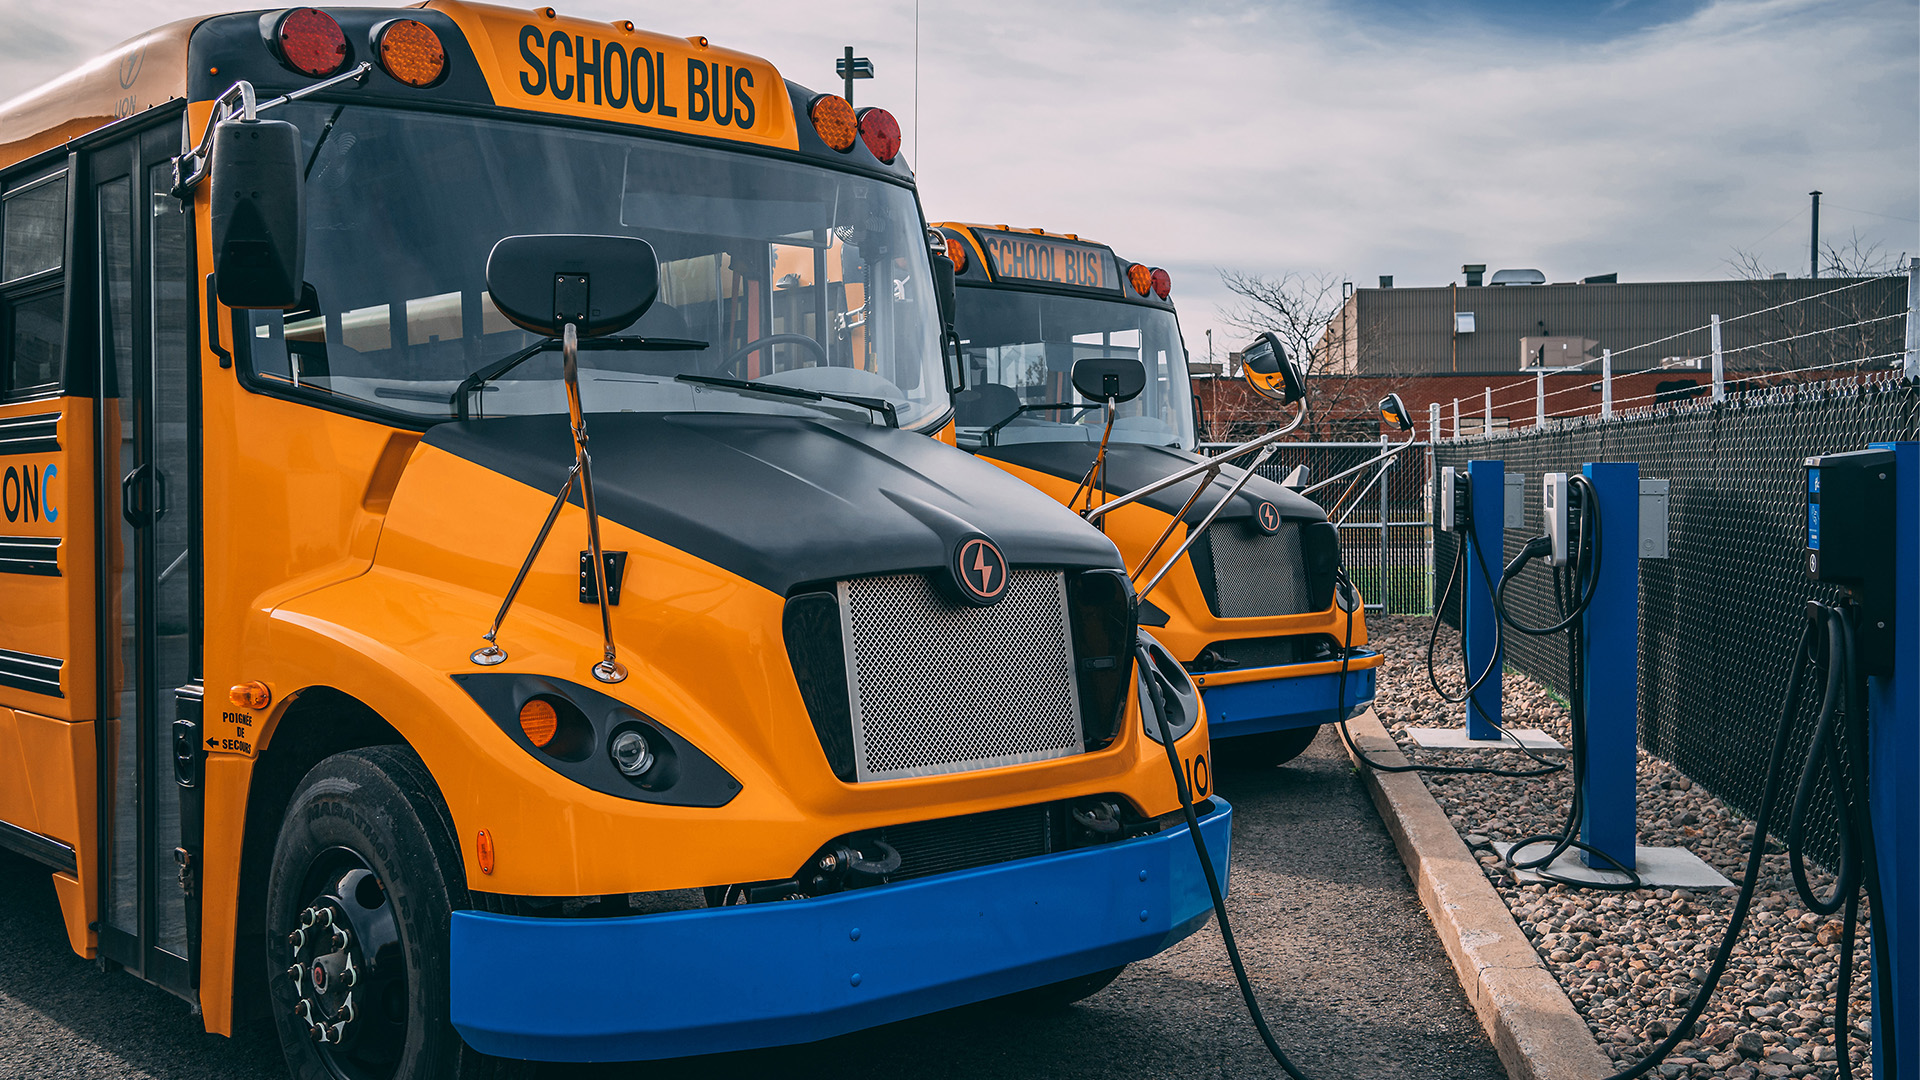 CPower Ready To Help School Districts Unlock Full Value of Electric School Buses Through Federal Rebate Program